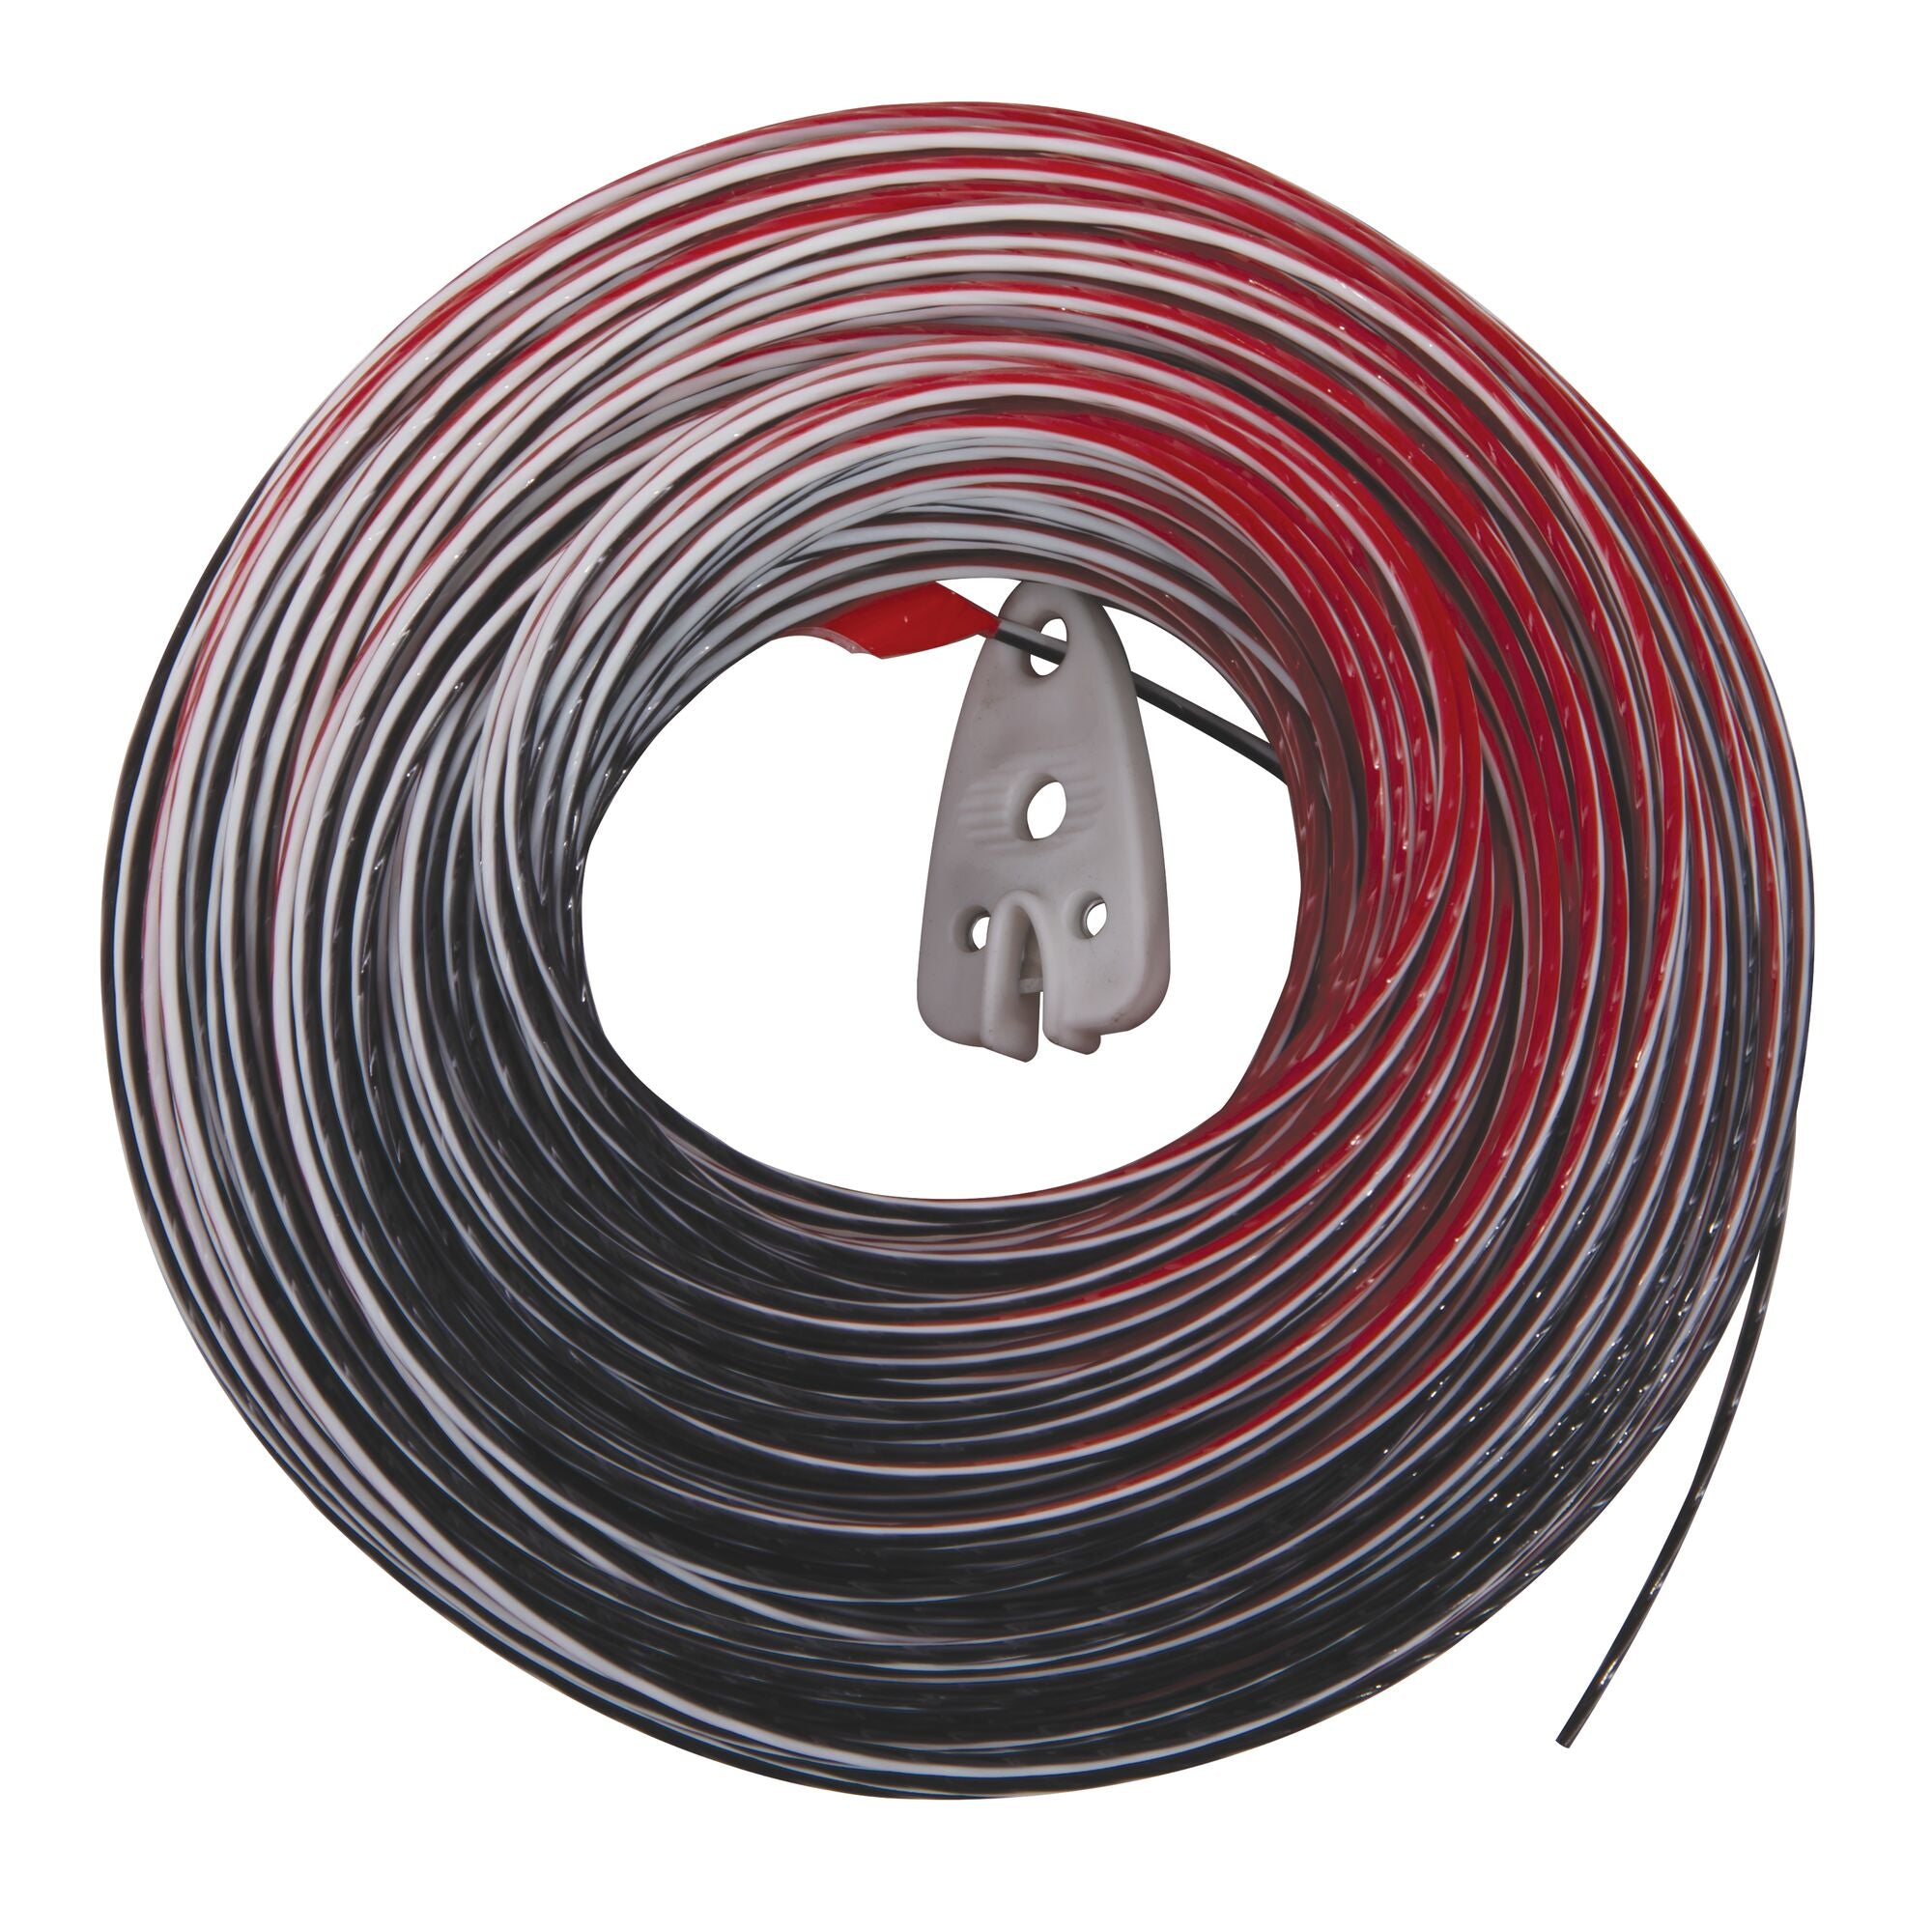 2 roll Fishing Wire 984FT328Yard300M 8.0#, Clear Nepal